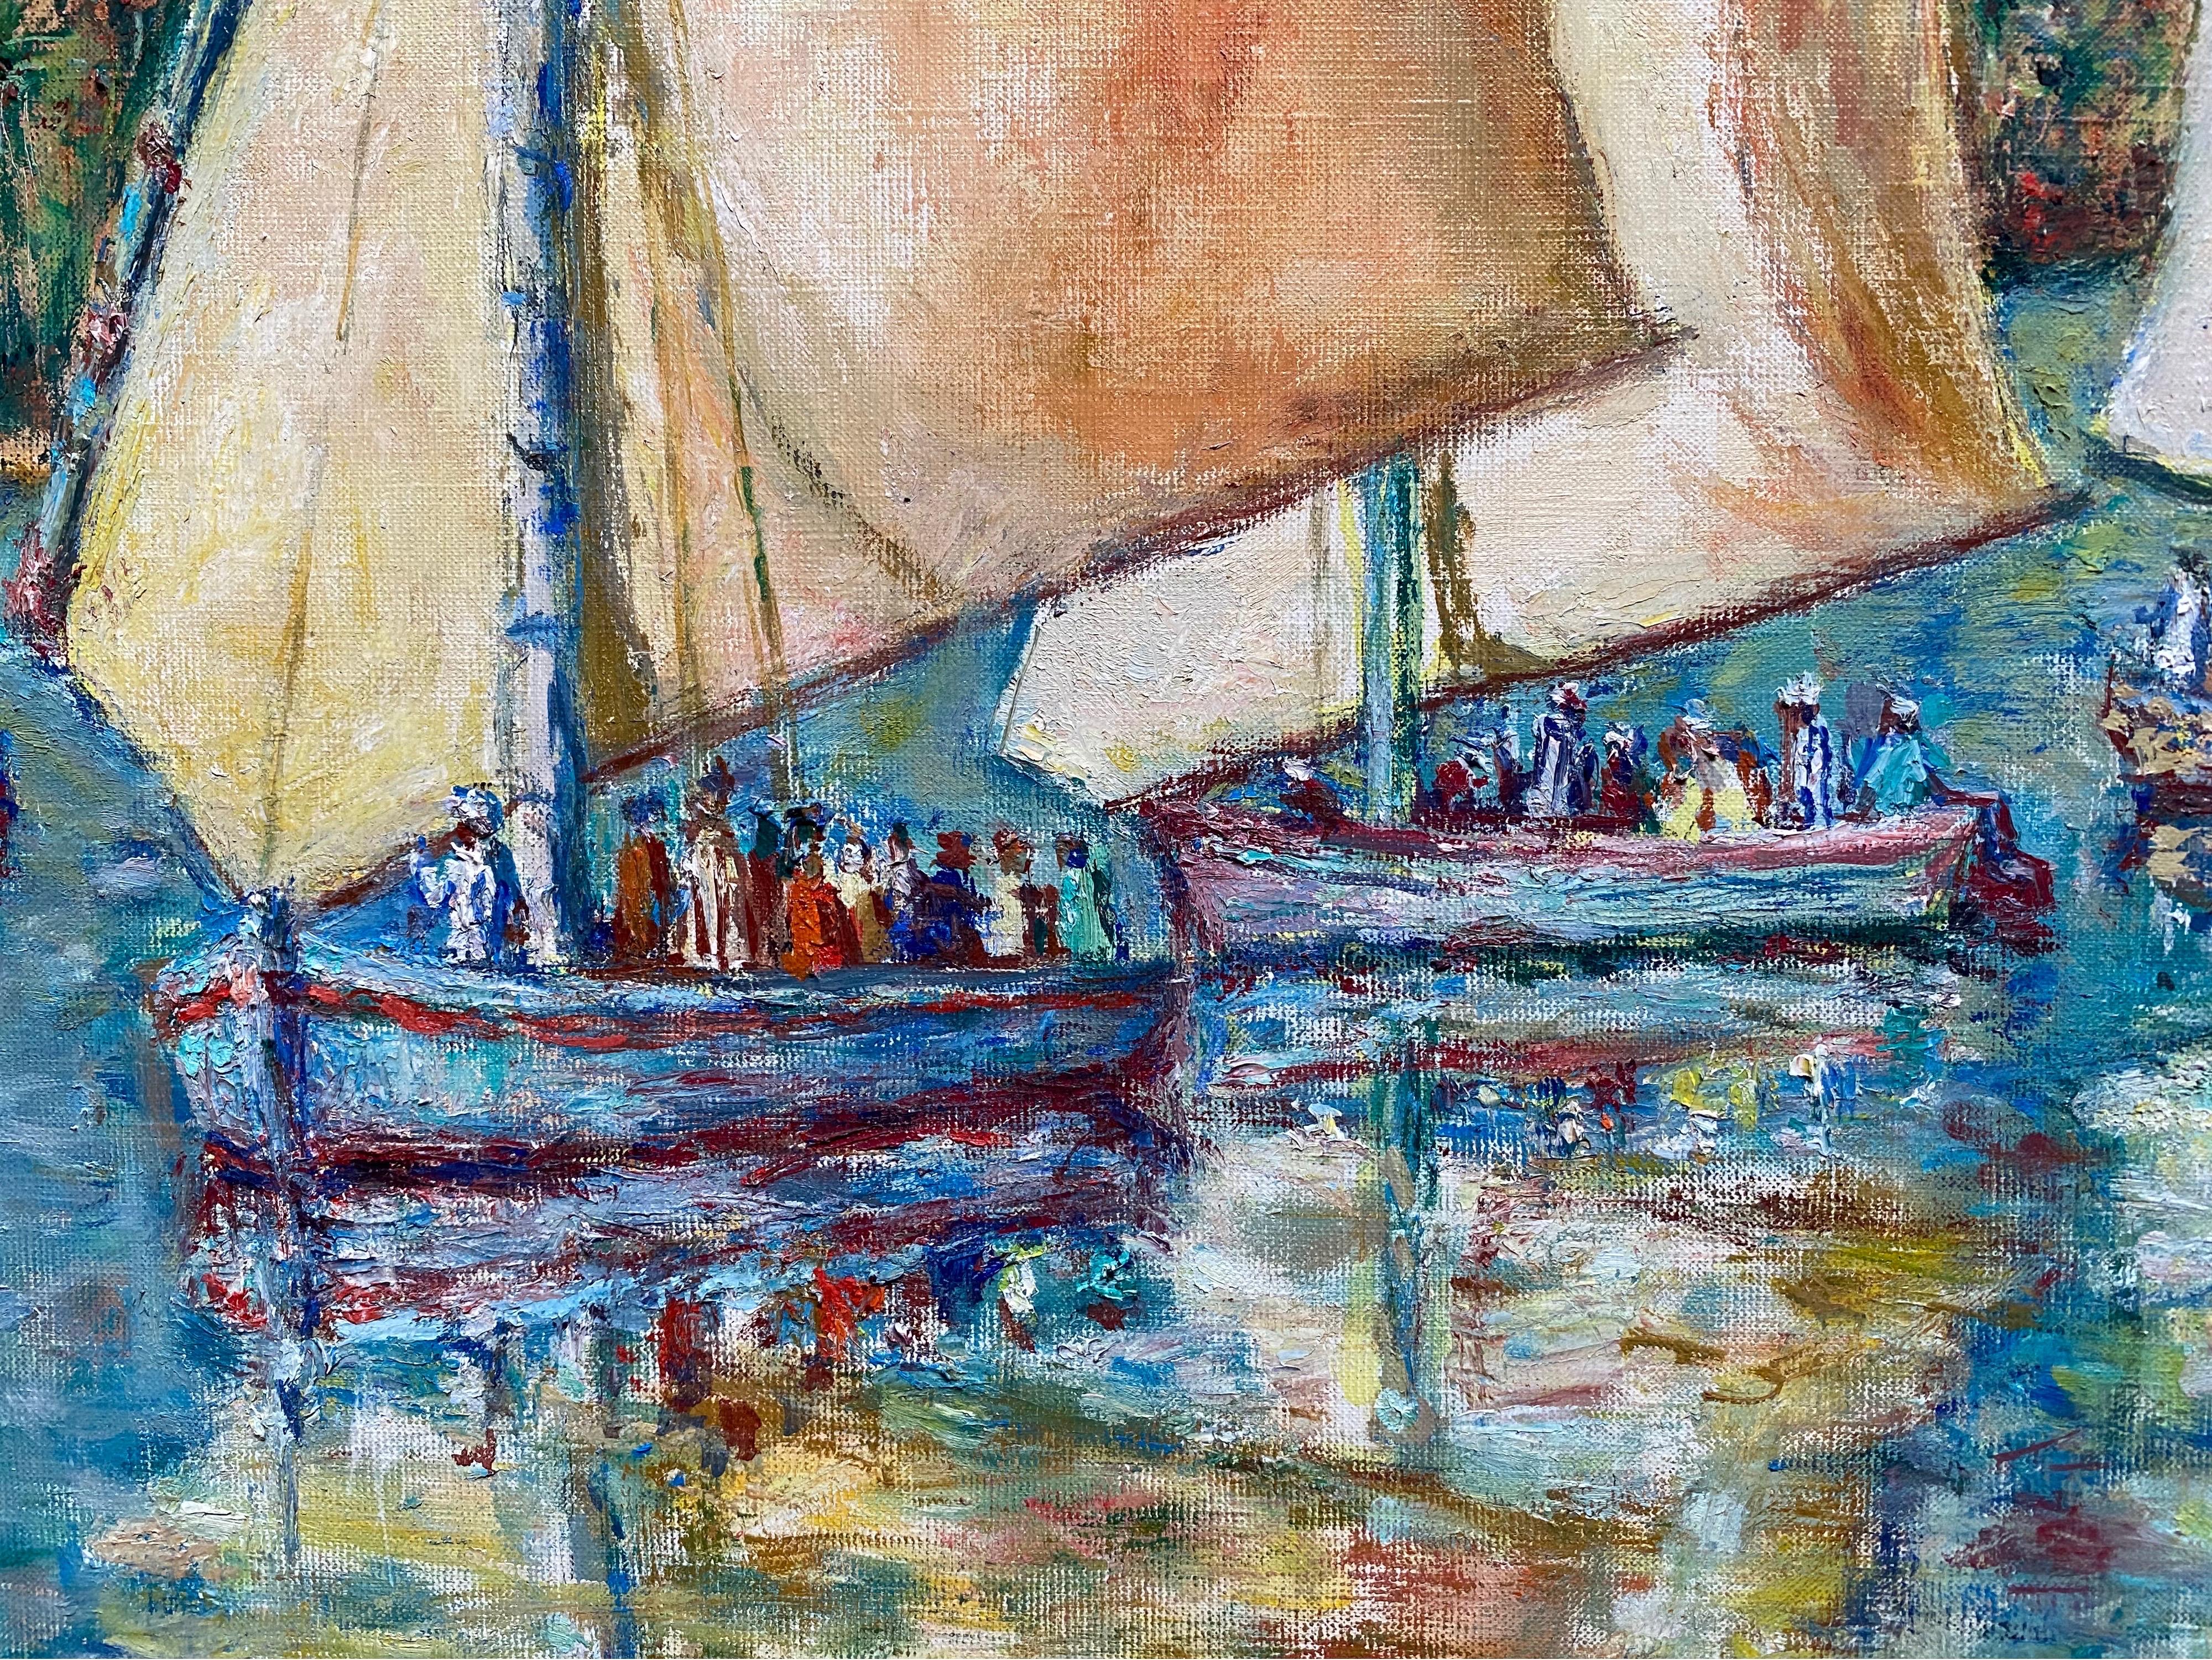 Artist: Maurice Tisseyre (French 1920-2017), signed

Title: The Regatta

Medium: oil on canvas

Size:  painting: 38 x 51 inches
        
Provenance: private collection, France

Condition: The painting is in good and pleasing condition.
